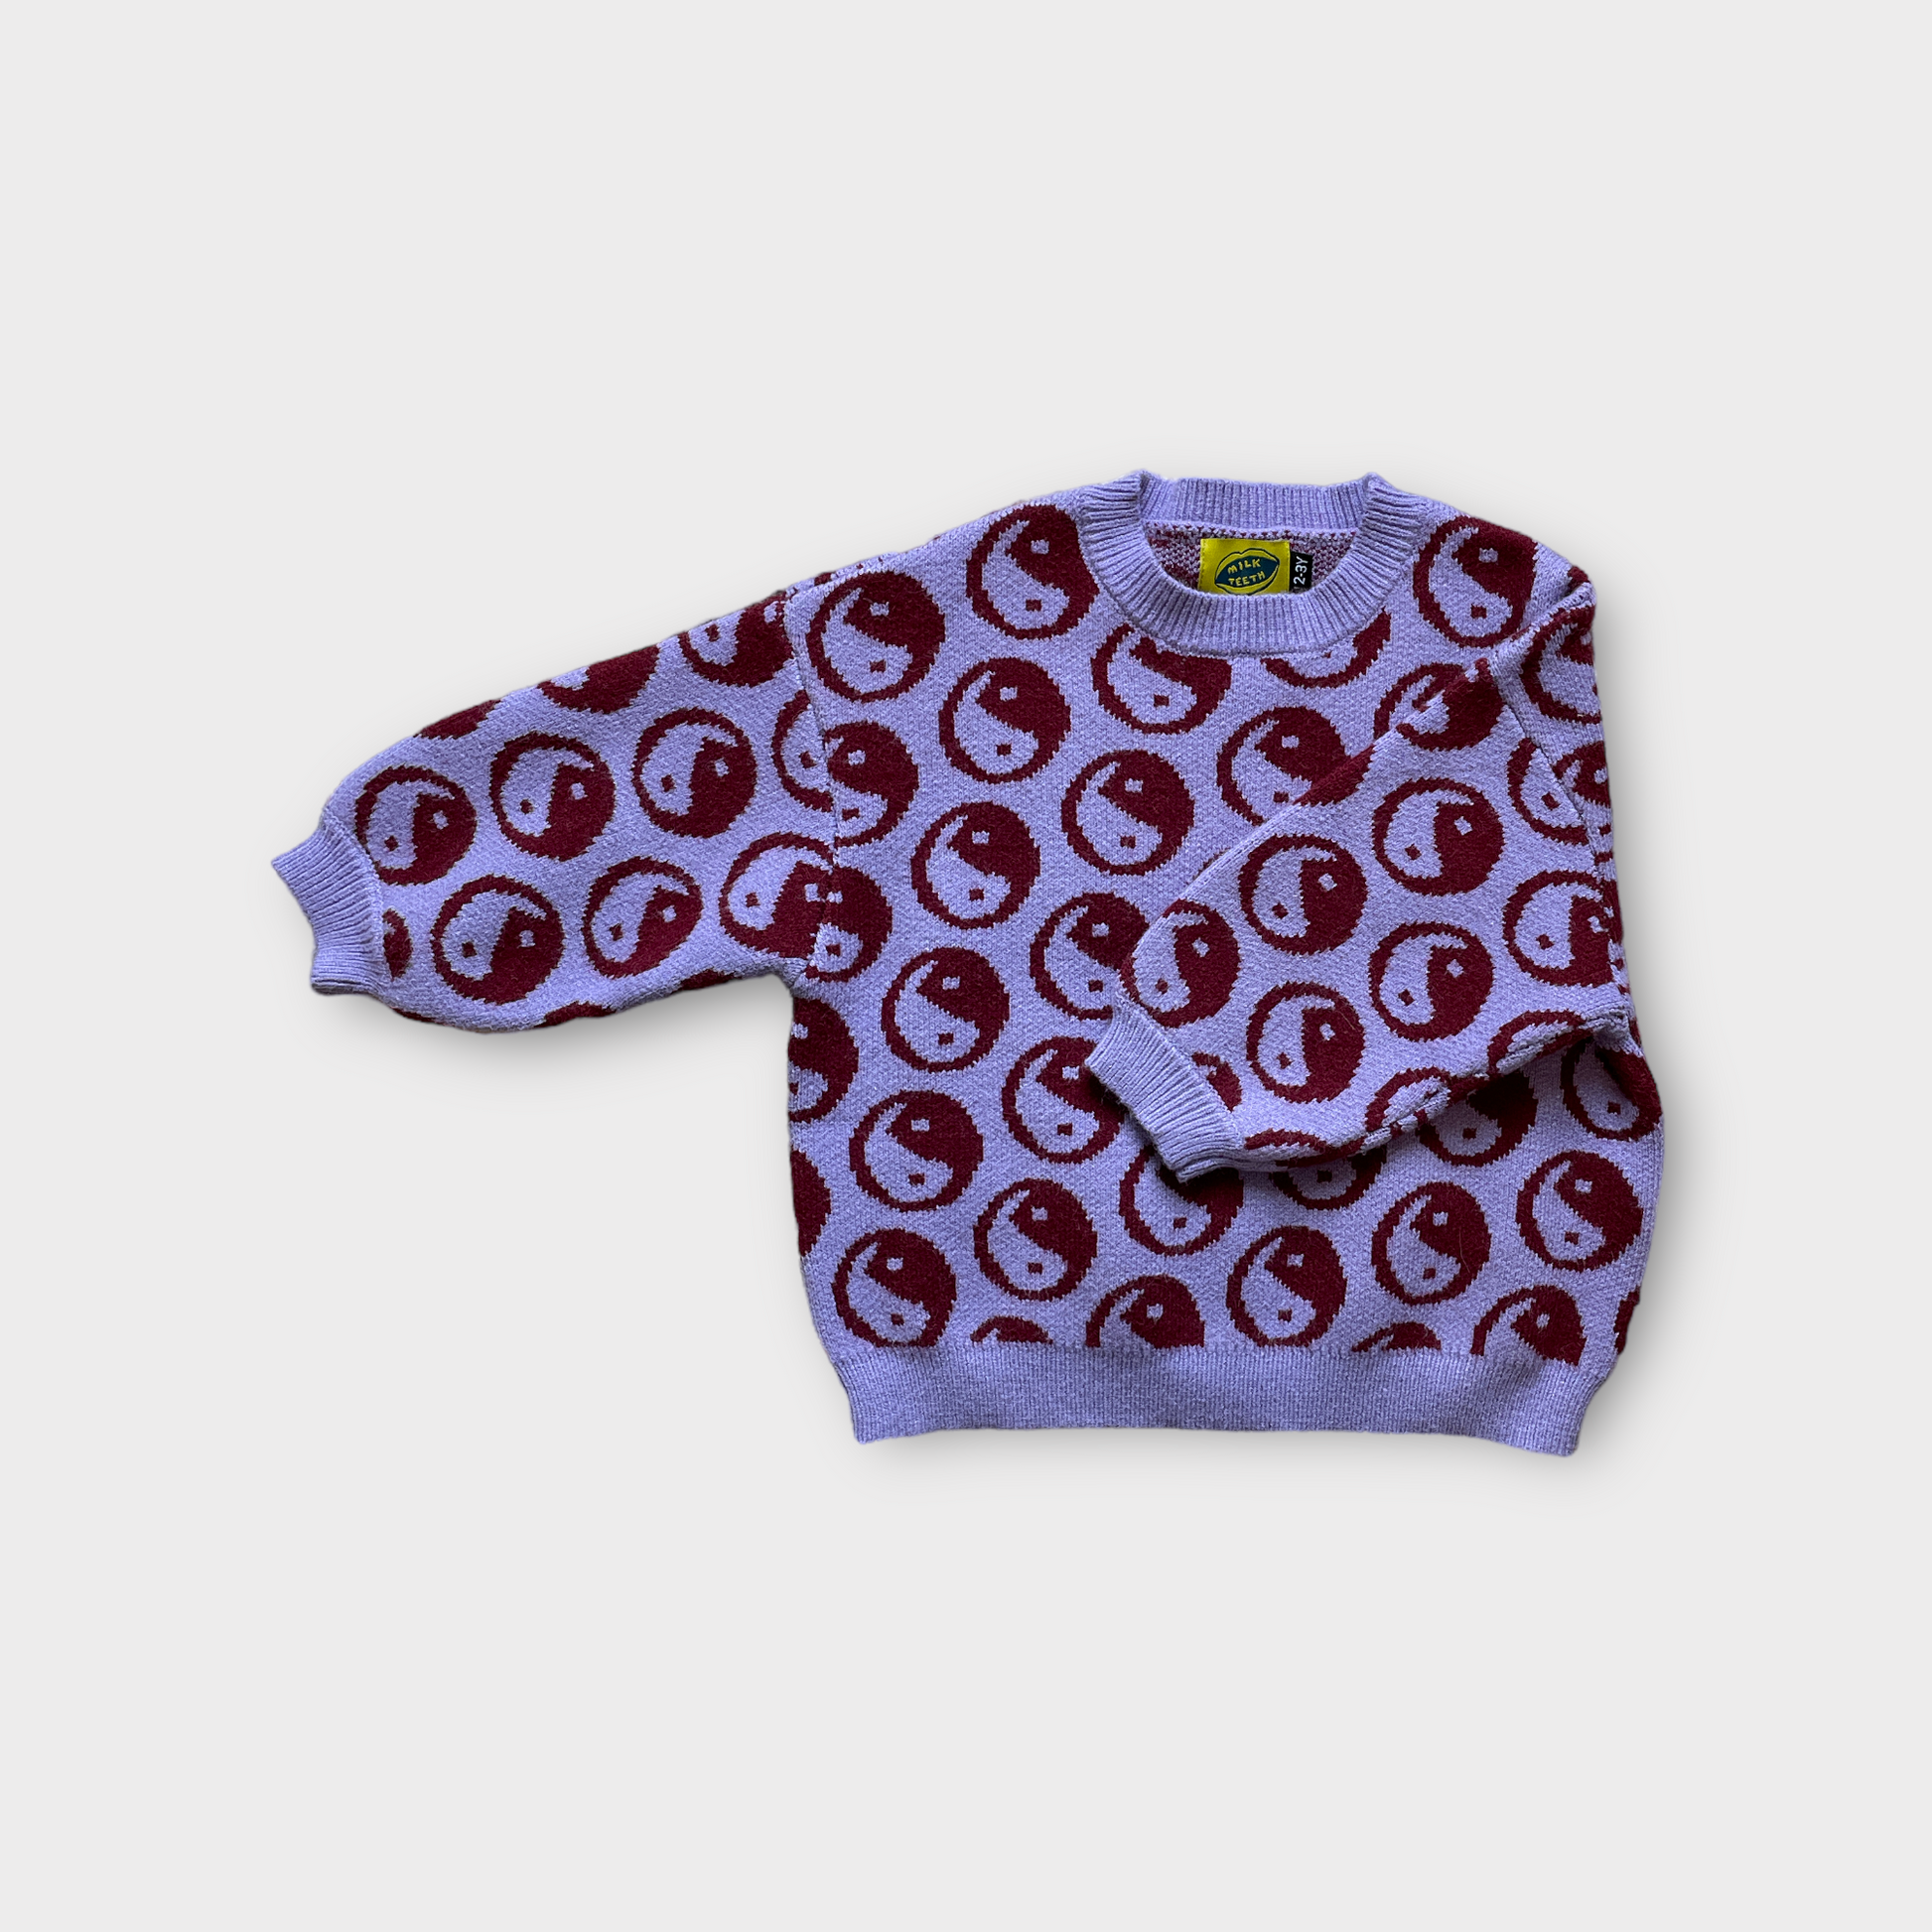 violet kids sweater covered with dark ying yang symbols the right sleeve is folded to show pattern on sleeve